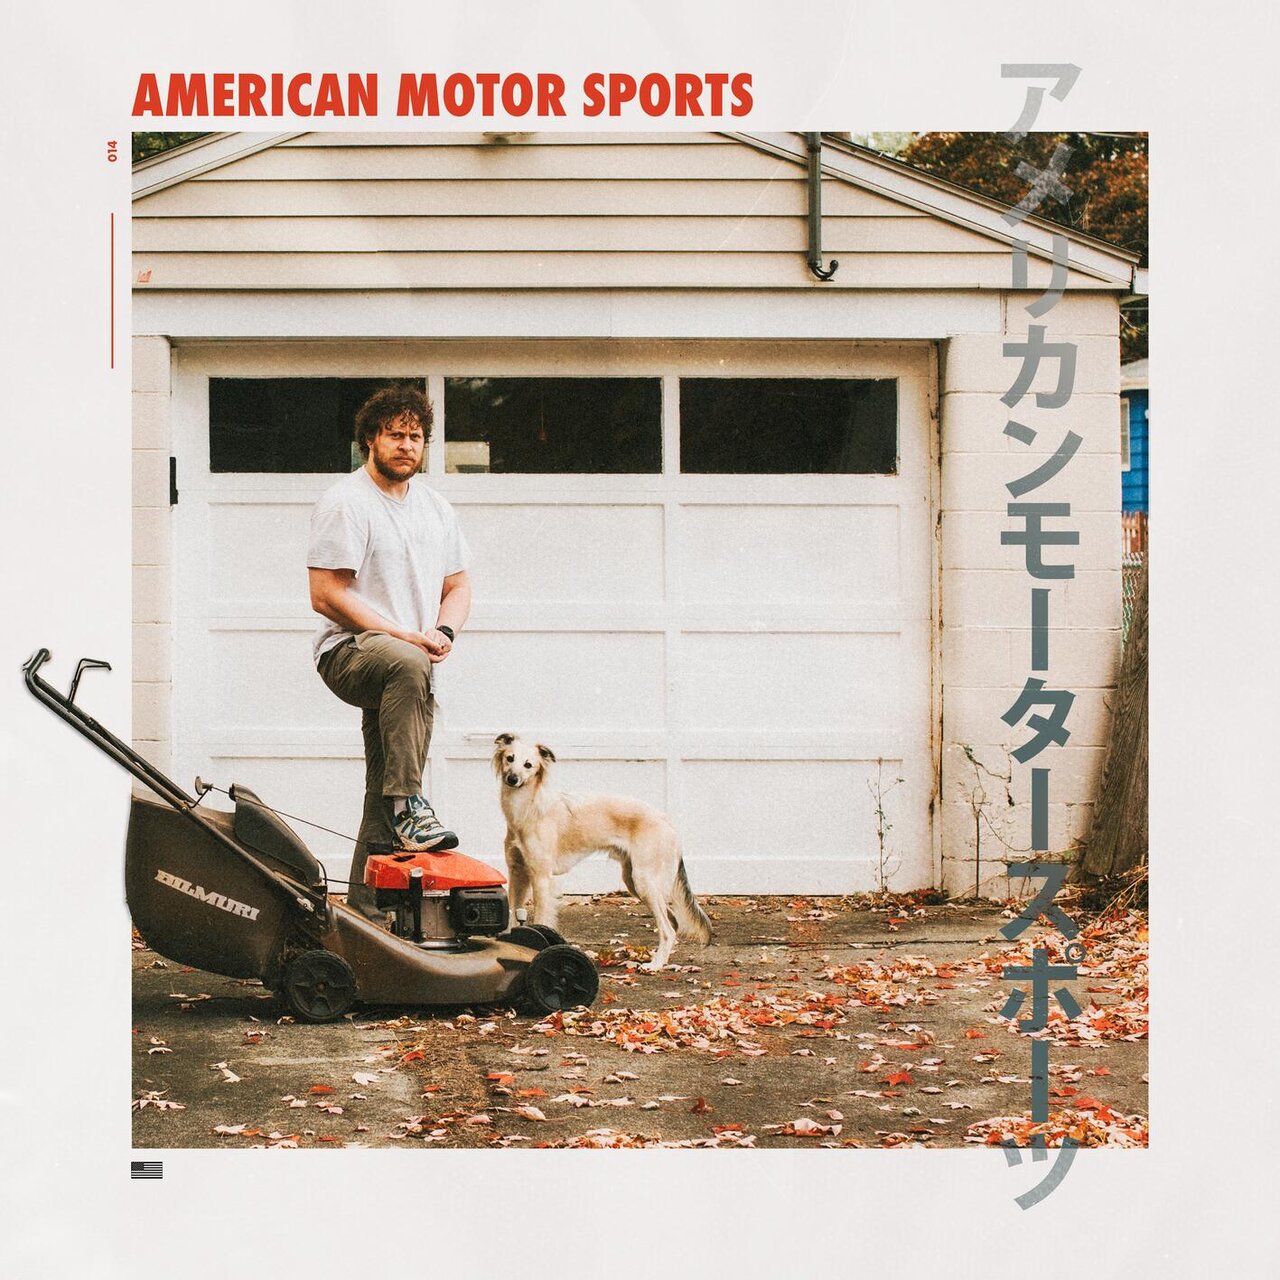 Bilmuri Cranks Hogs And Stands Out Amongst The Scene Beautifully With ‘AMERICAN MOTOR SPORTS’